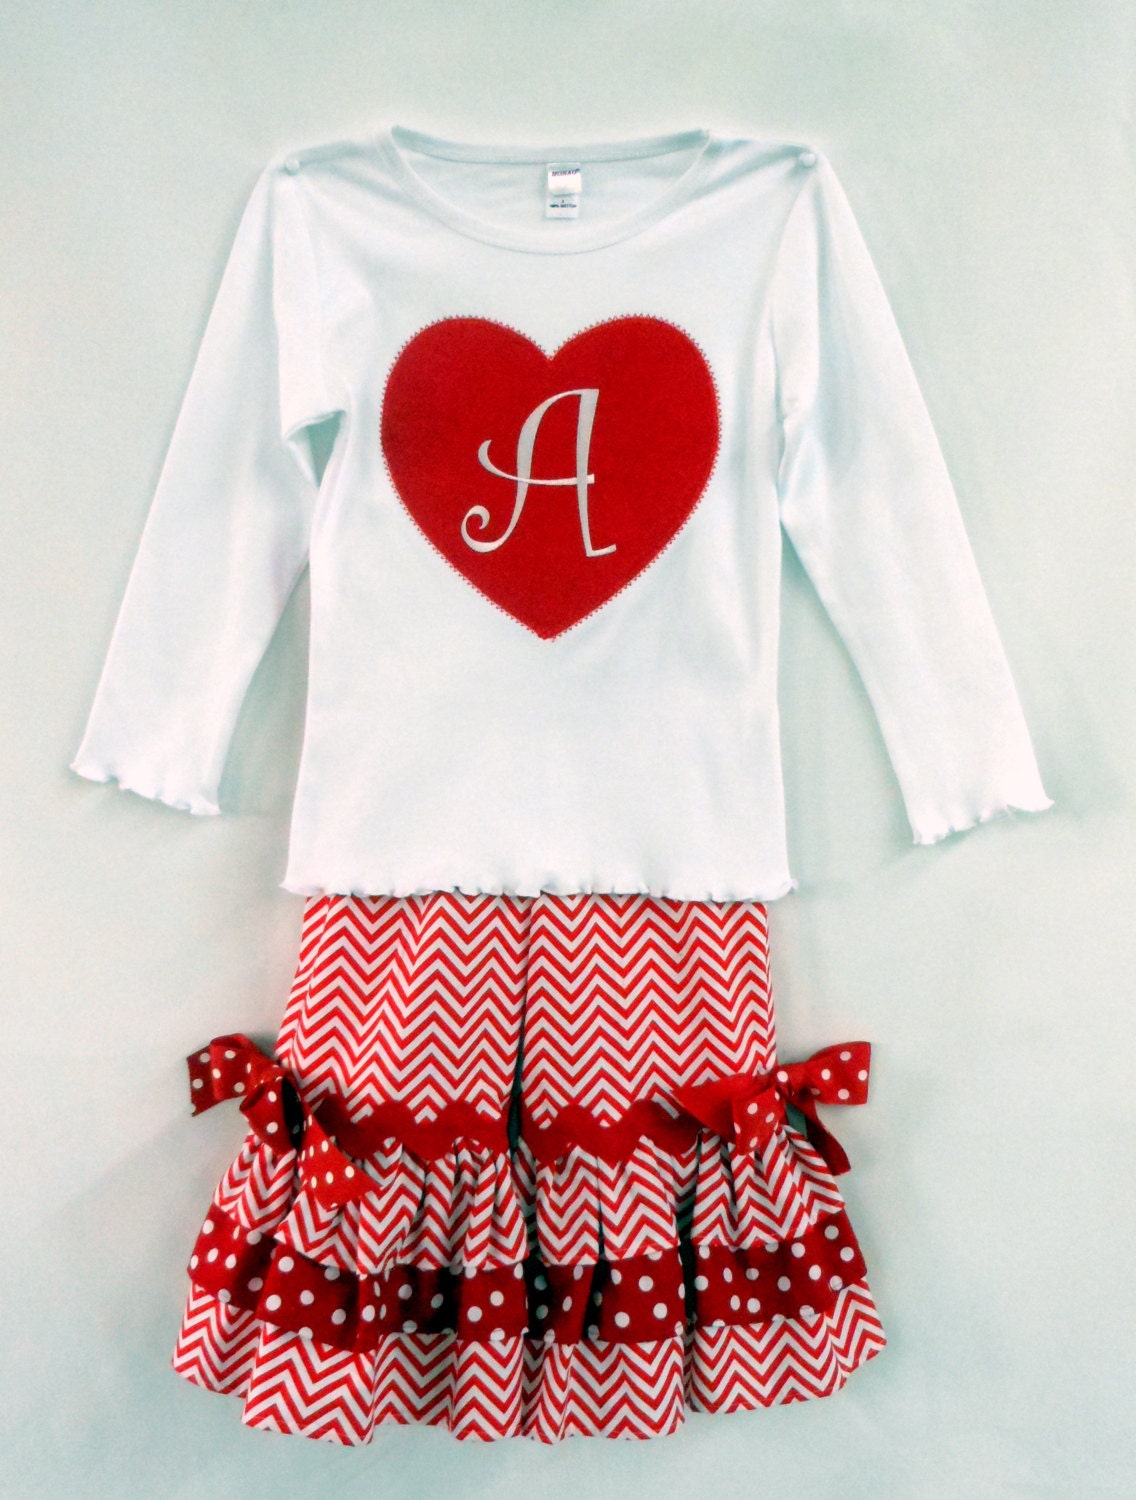 Immediate shipping for Valentine red girl chevron personalized heart applique Monag tee and ruffle pant or capri set.  All sizes available.